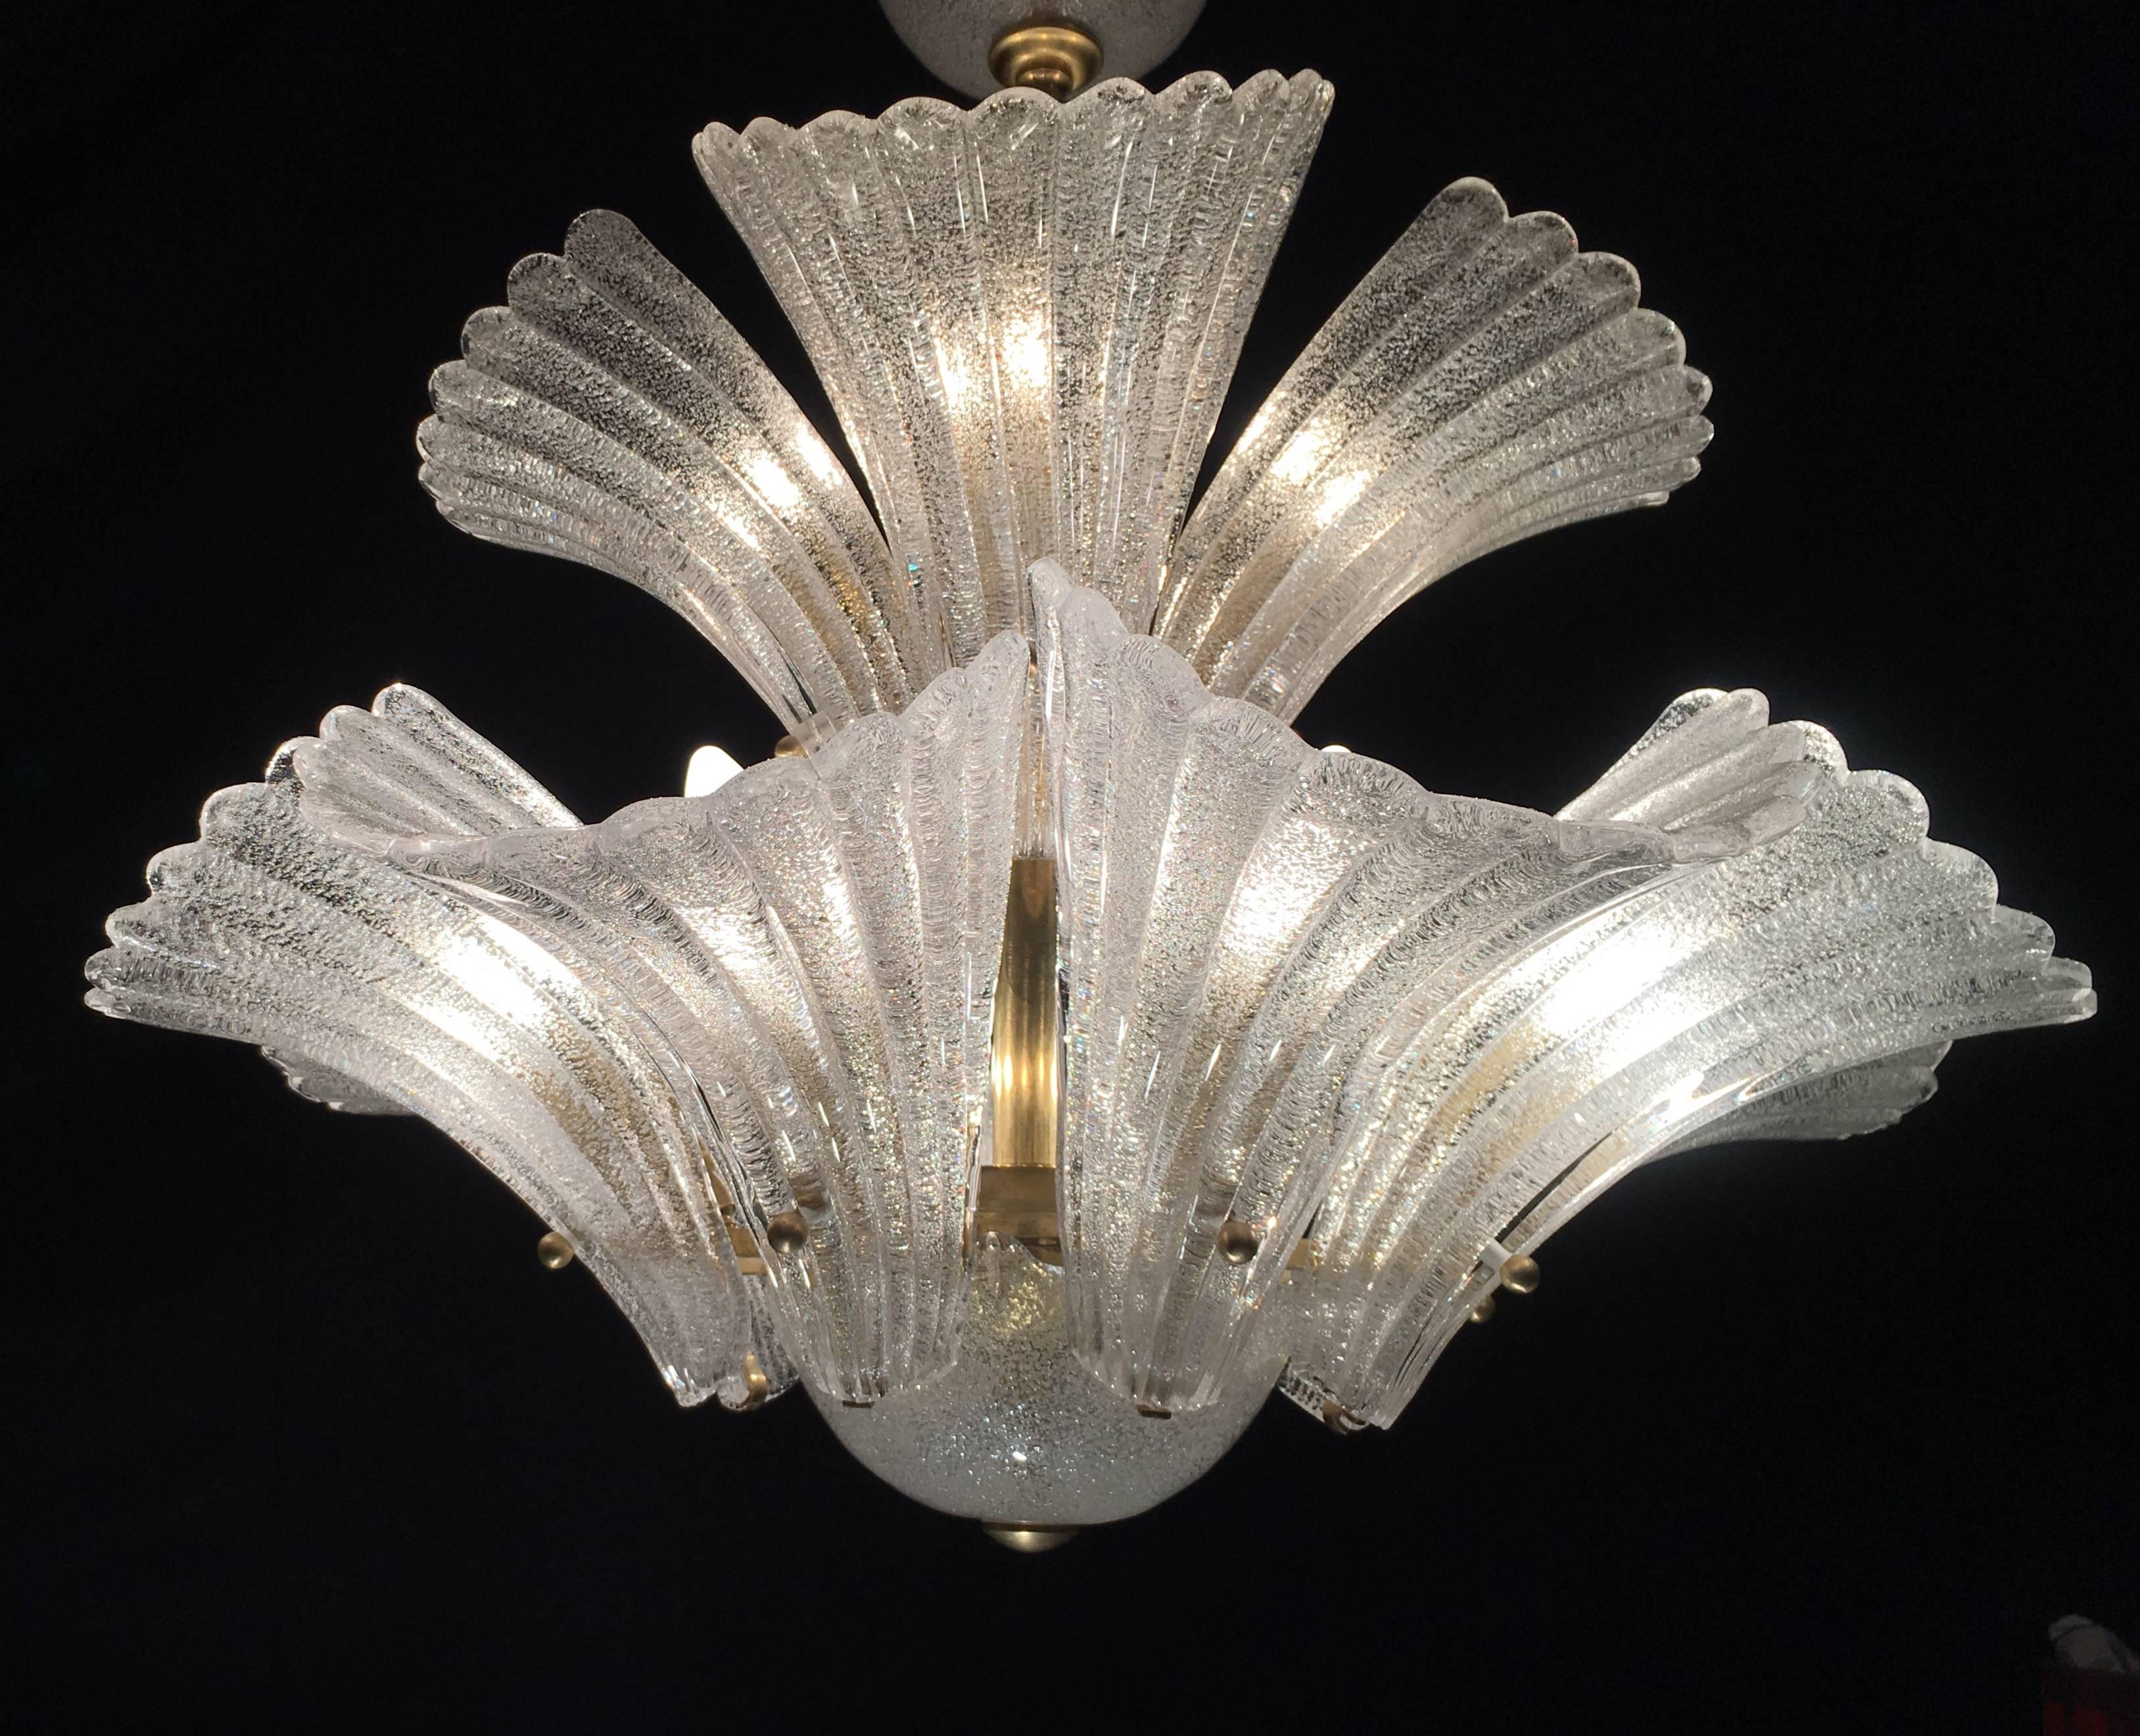 Sumptuous Murano glass chandelier in style Barovier & Toso, 1950s.

Consisting of 12 large leaves in blown glass 